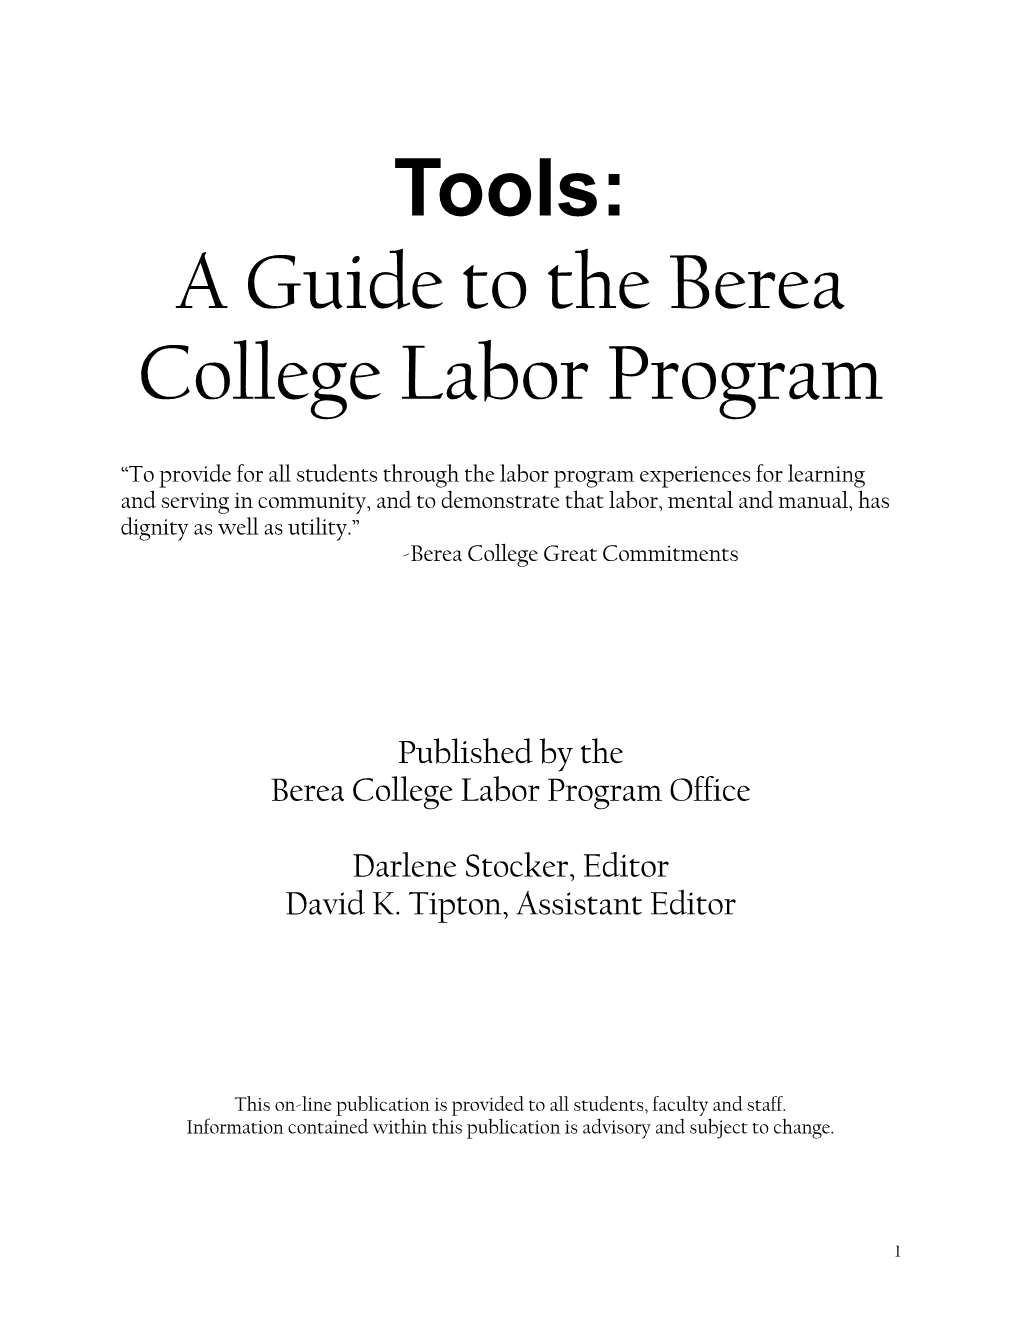 Tools: a Guide to the Berea College Labor Program